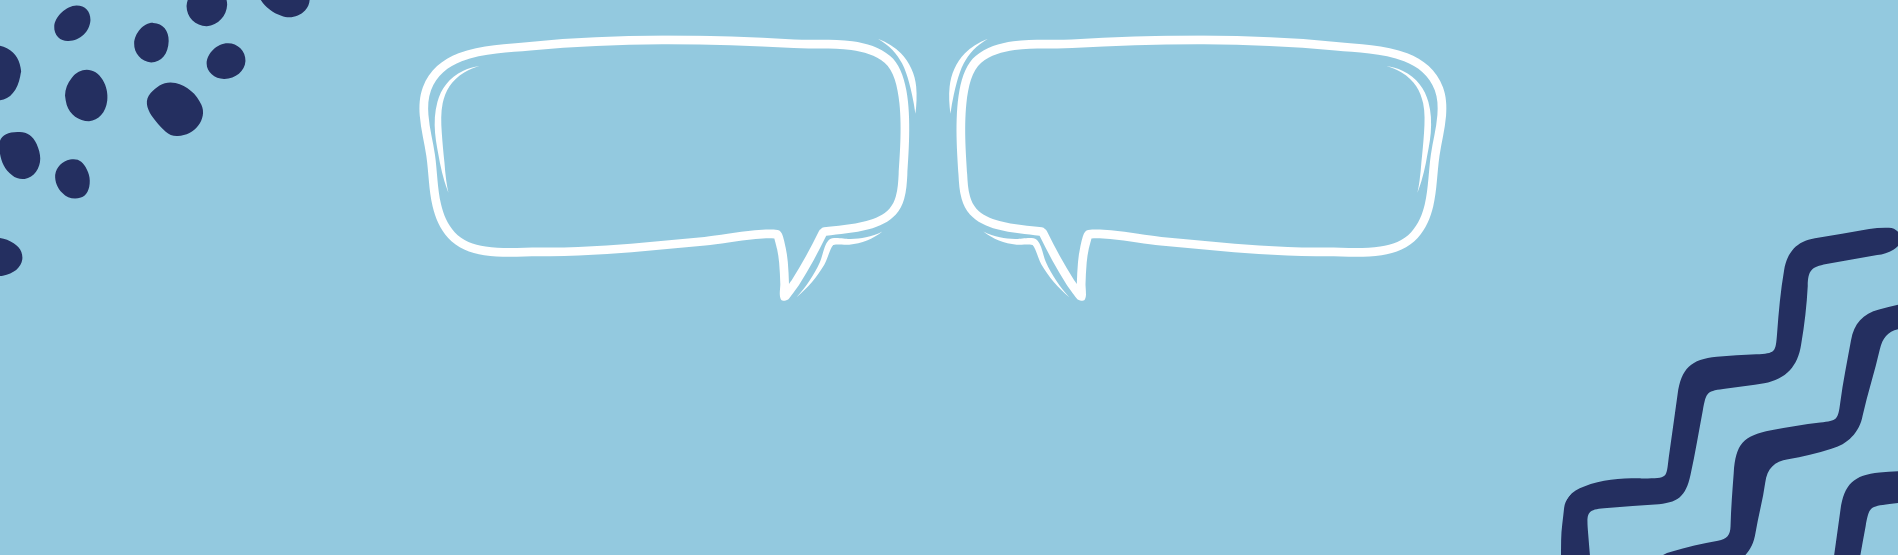 Outline of speech bubbles on a light blue background